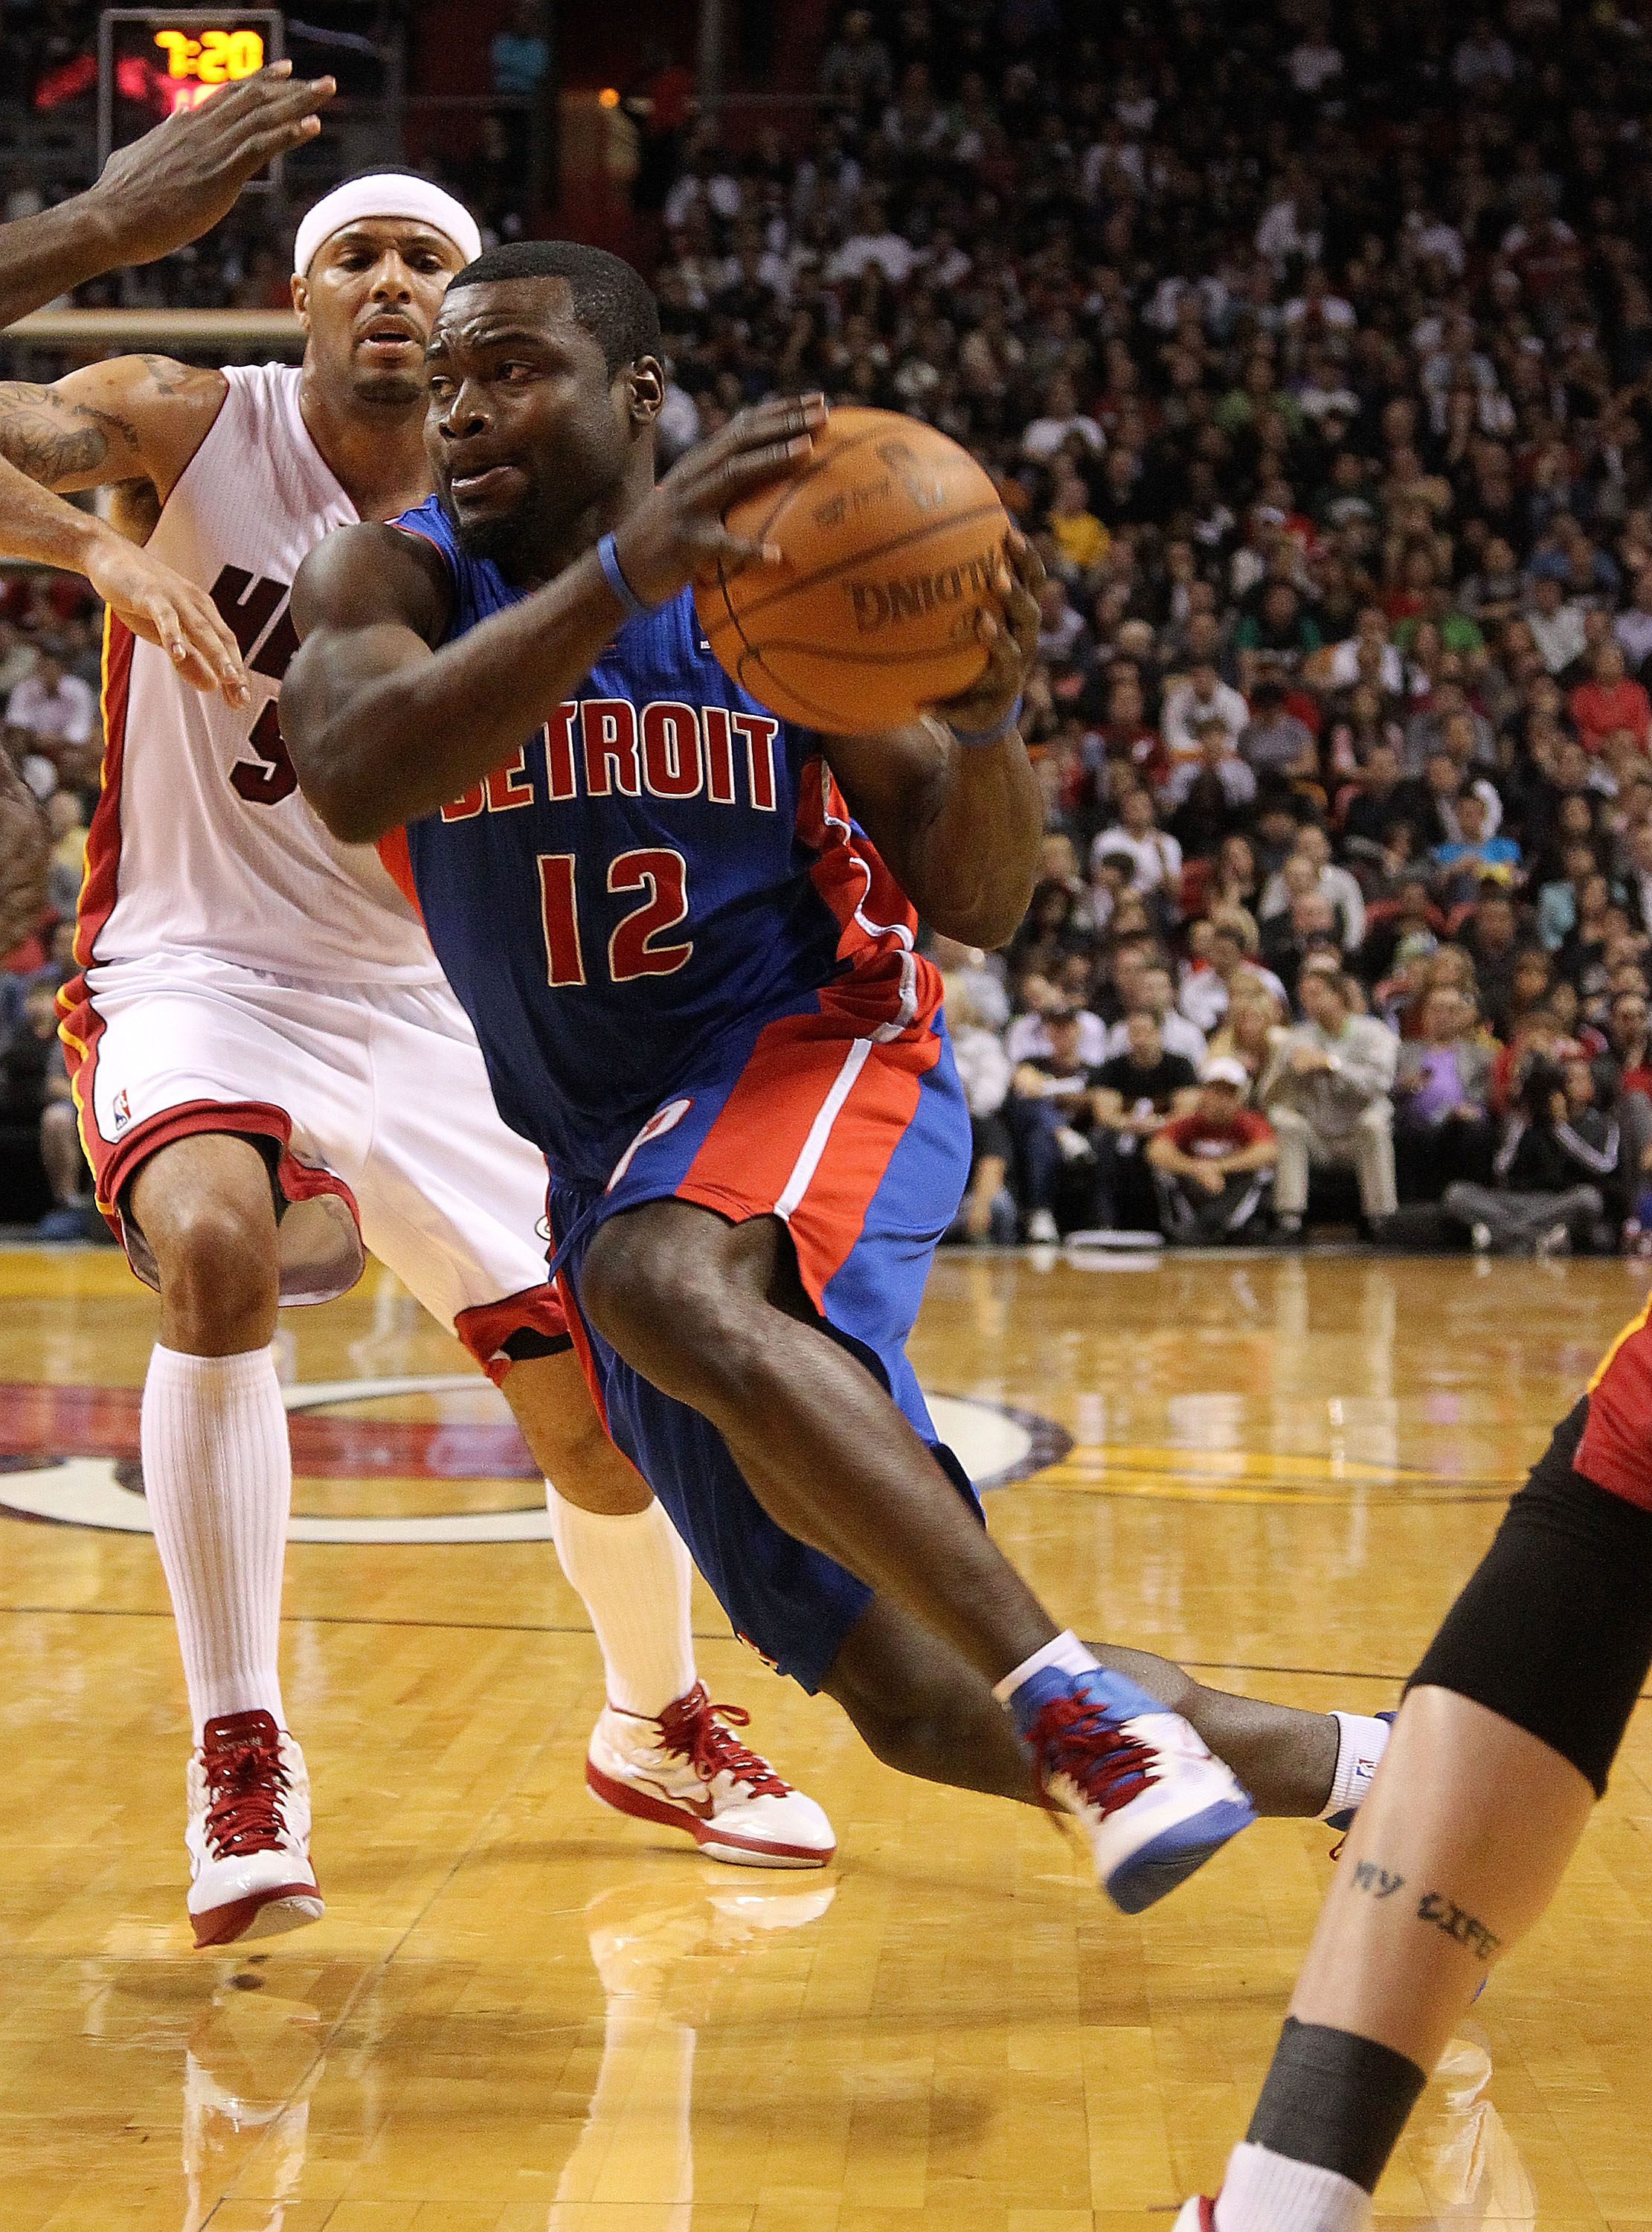 A Mr. D is seen on the Detroit Pistons jersey of Will Bynum